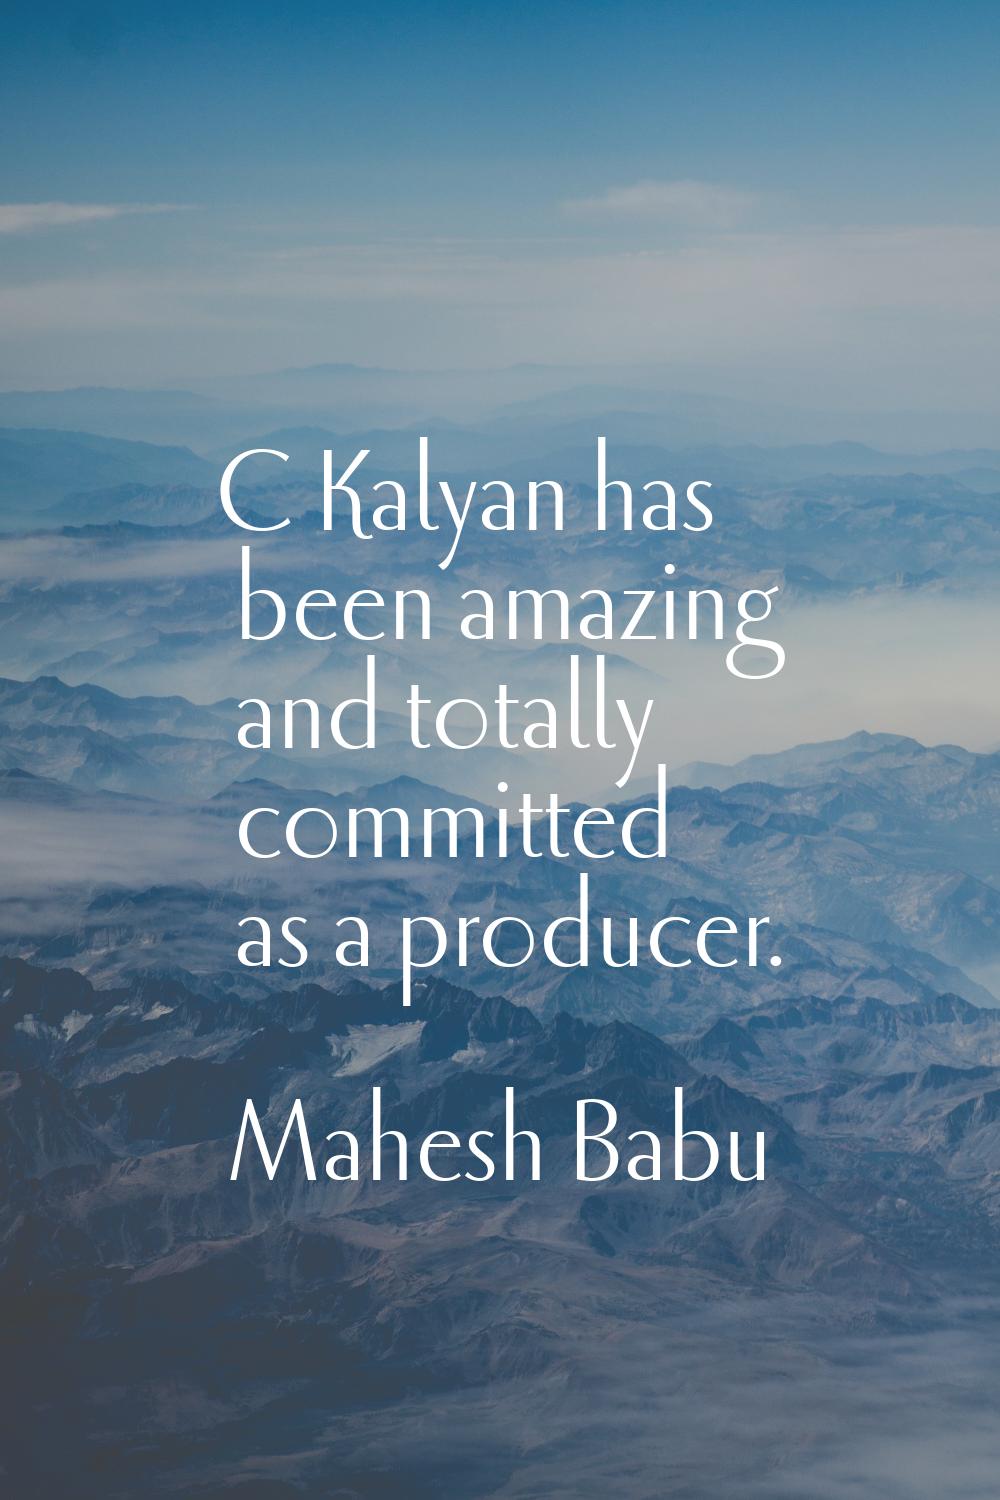 C Kalyan has been amazing and totally committed as a producer.